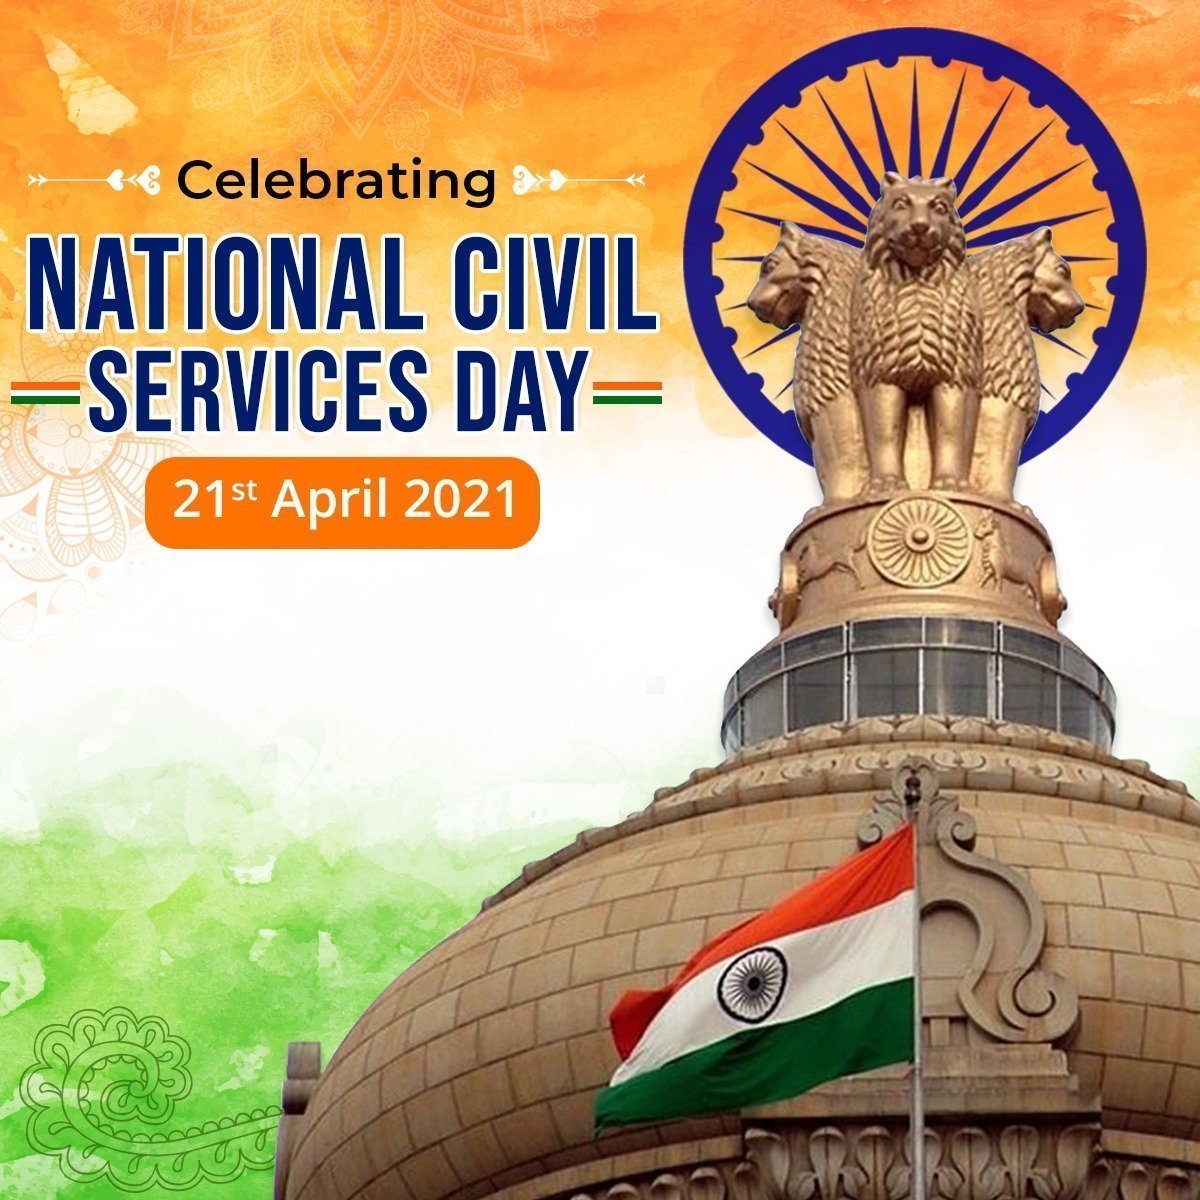 #NationalCivilServicesDay
commemorates the day when 1st HM #SVPatel addressed the probationers of Administrative Services Officers in 1947. He referred to the civil servants as the ‘steel frame of India’

In this thread let's tag civil servants n acknowledge their service 🇮🇳 1/n